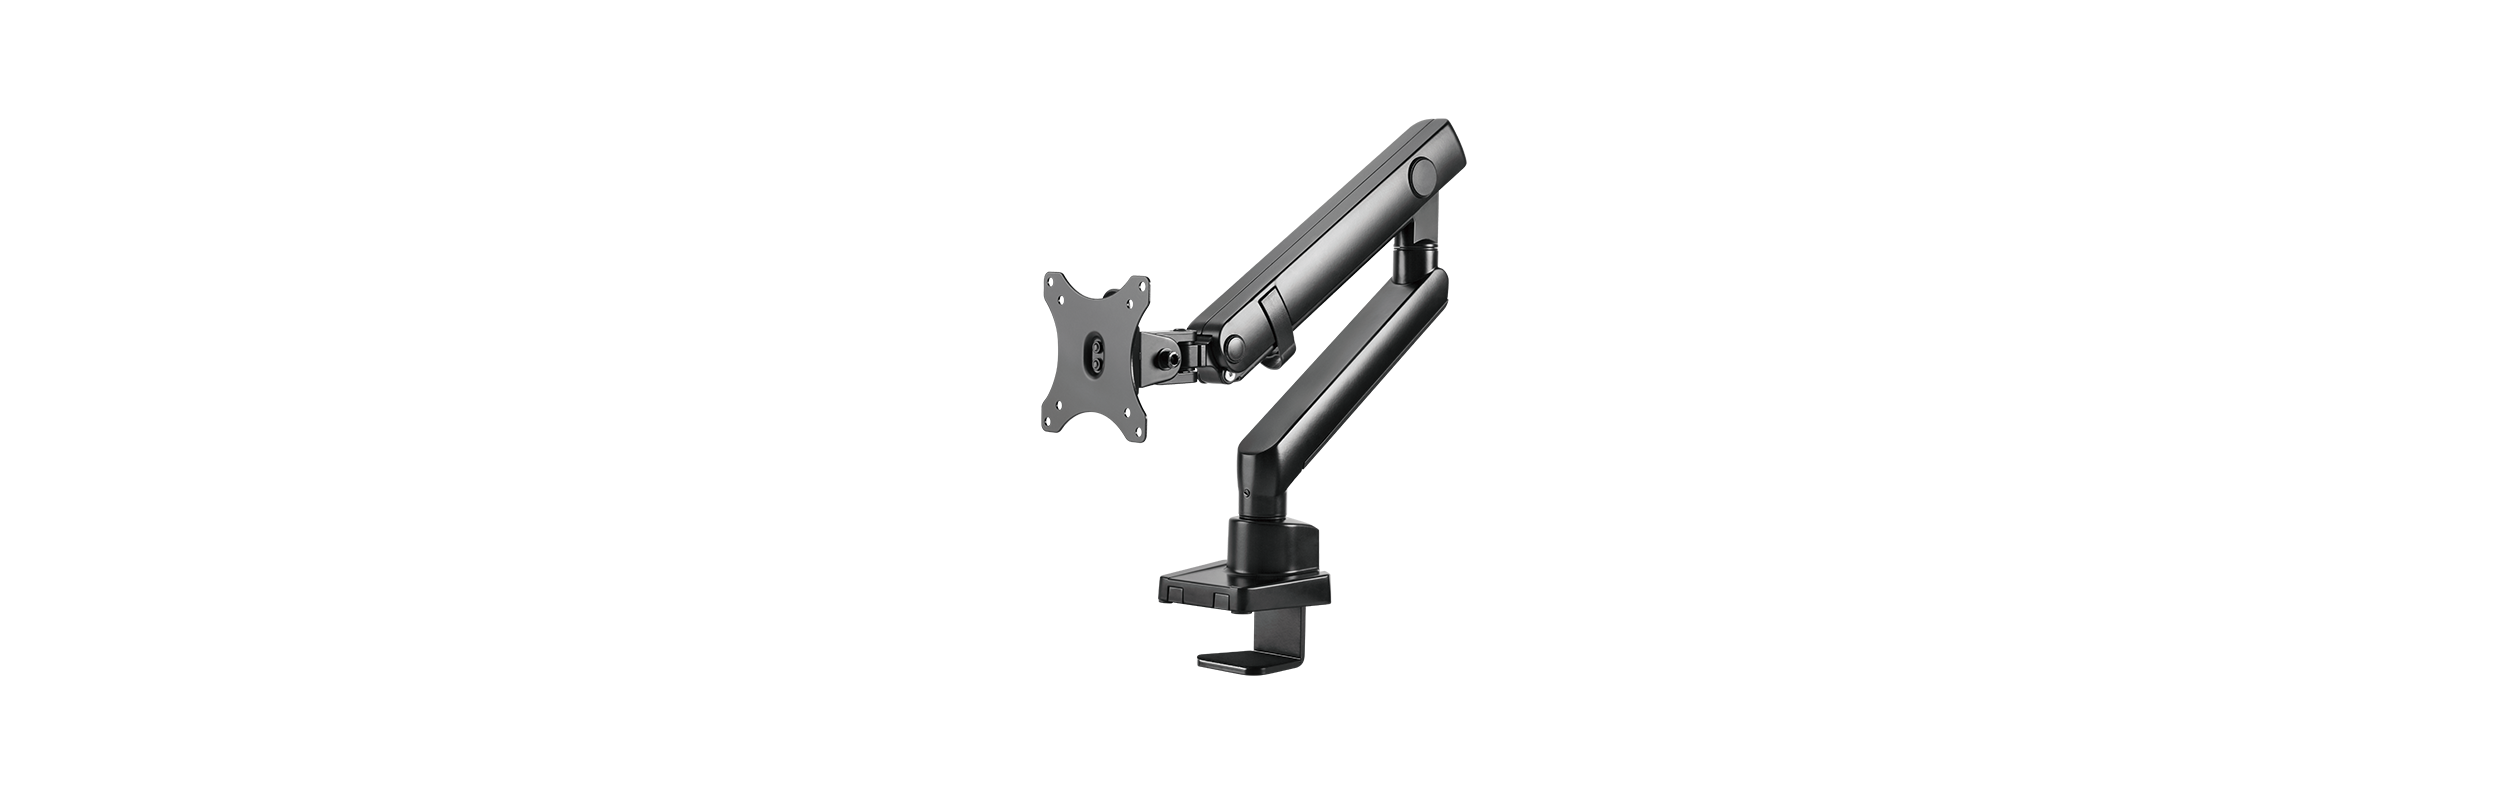 Monitor stand with table mount for one monitor up to 32 